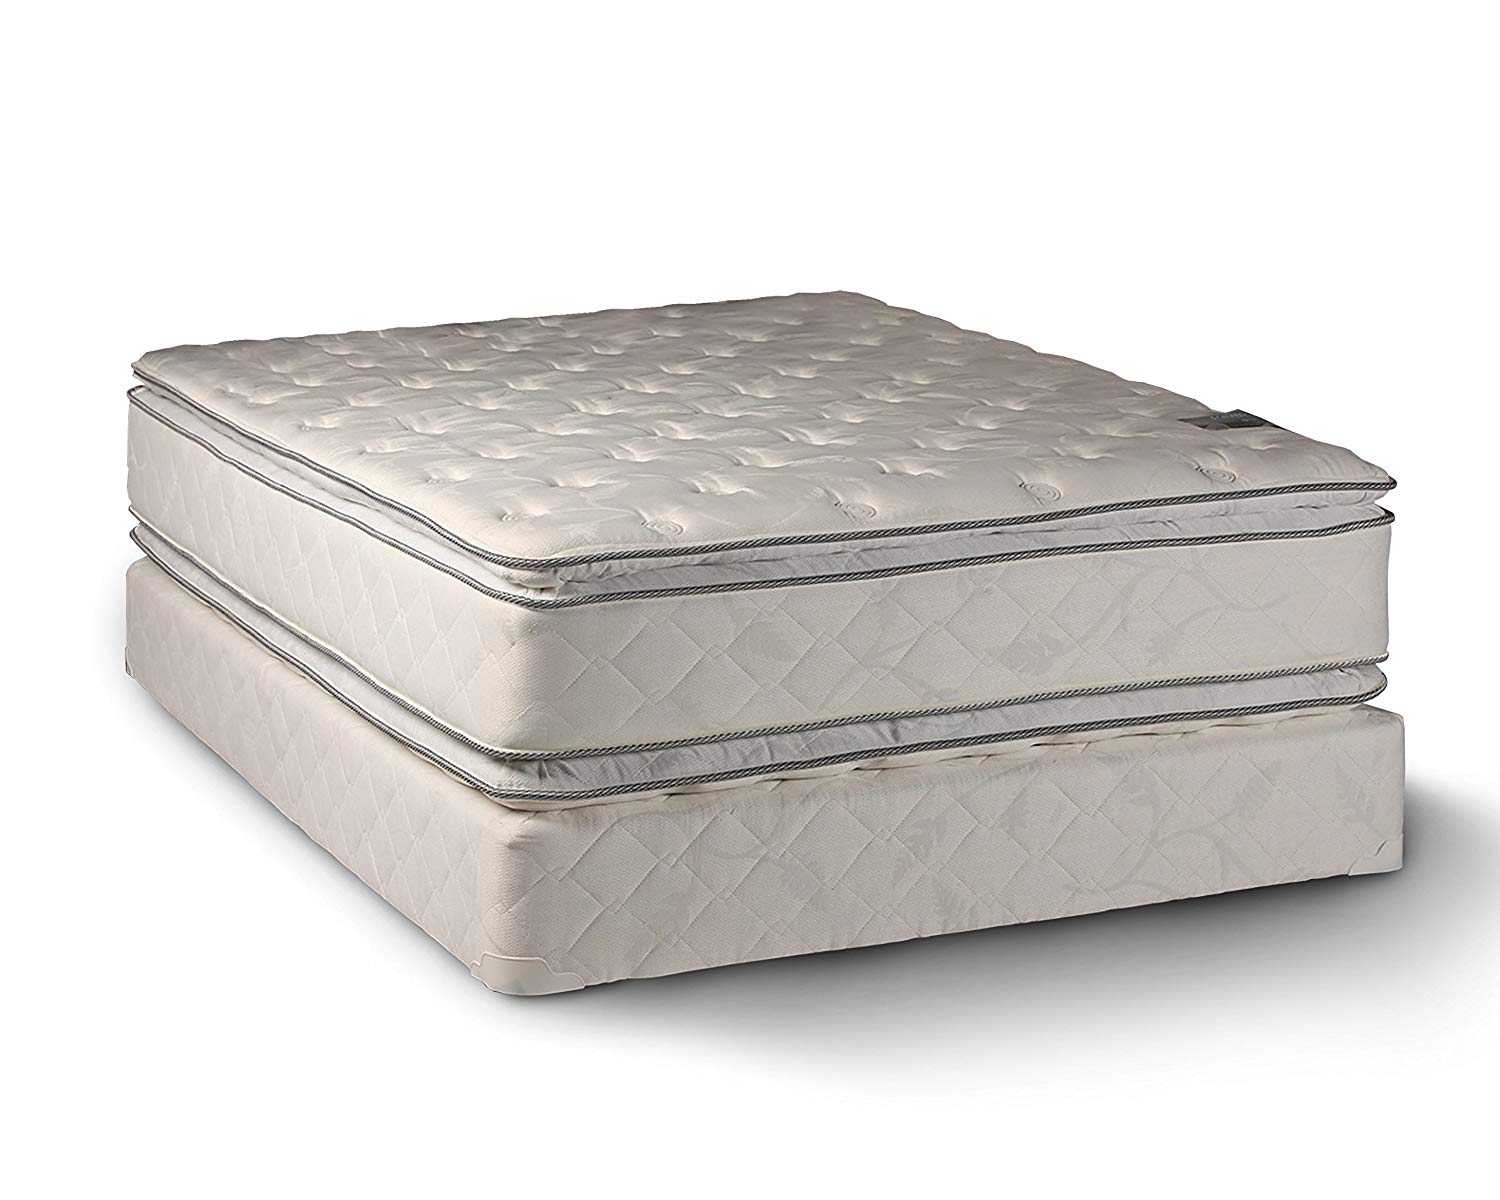 double sided mattress king cocoa fl